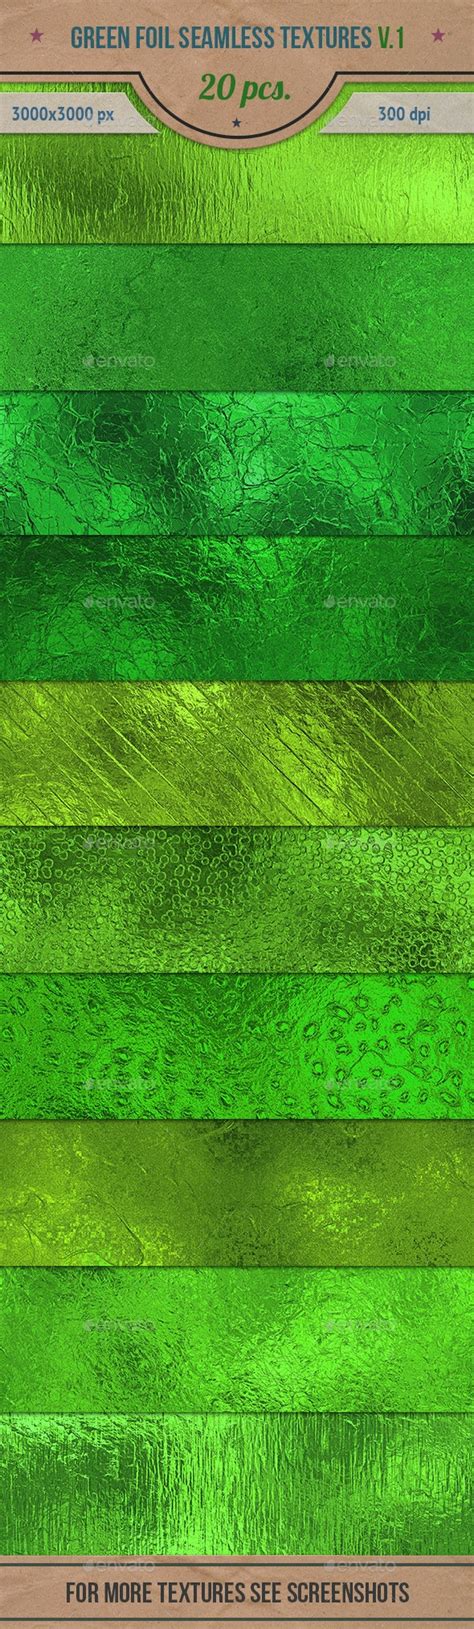 Green Foil Seamless Textures Pack V1 By Marabudesign Graphicriver